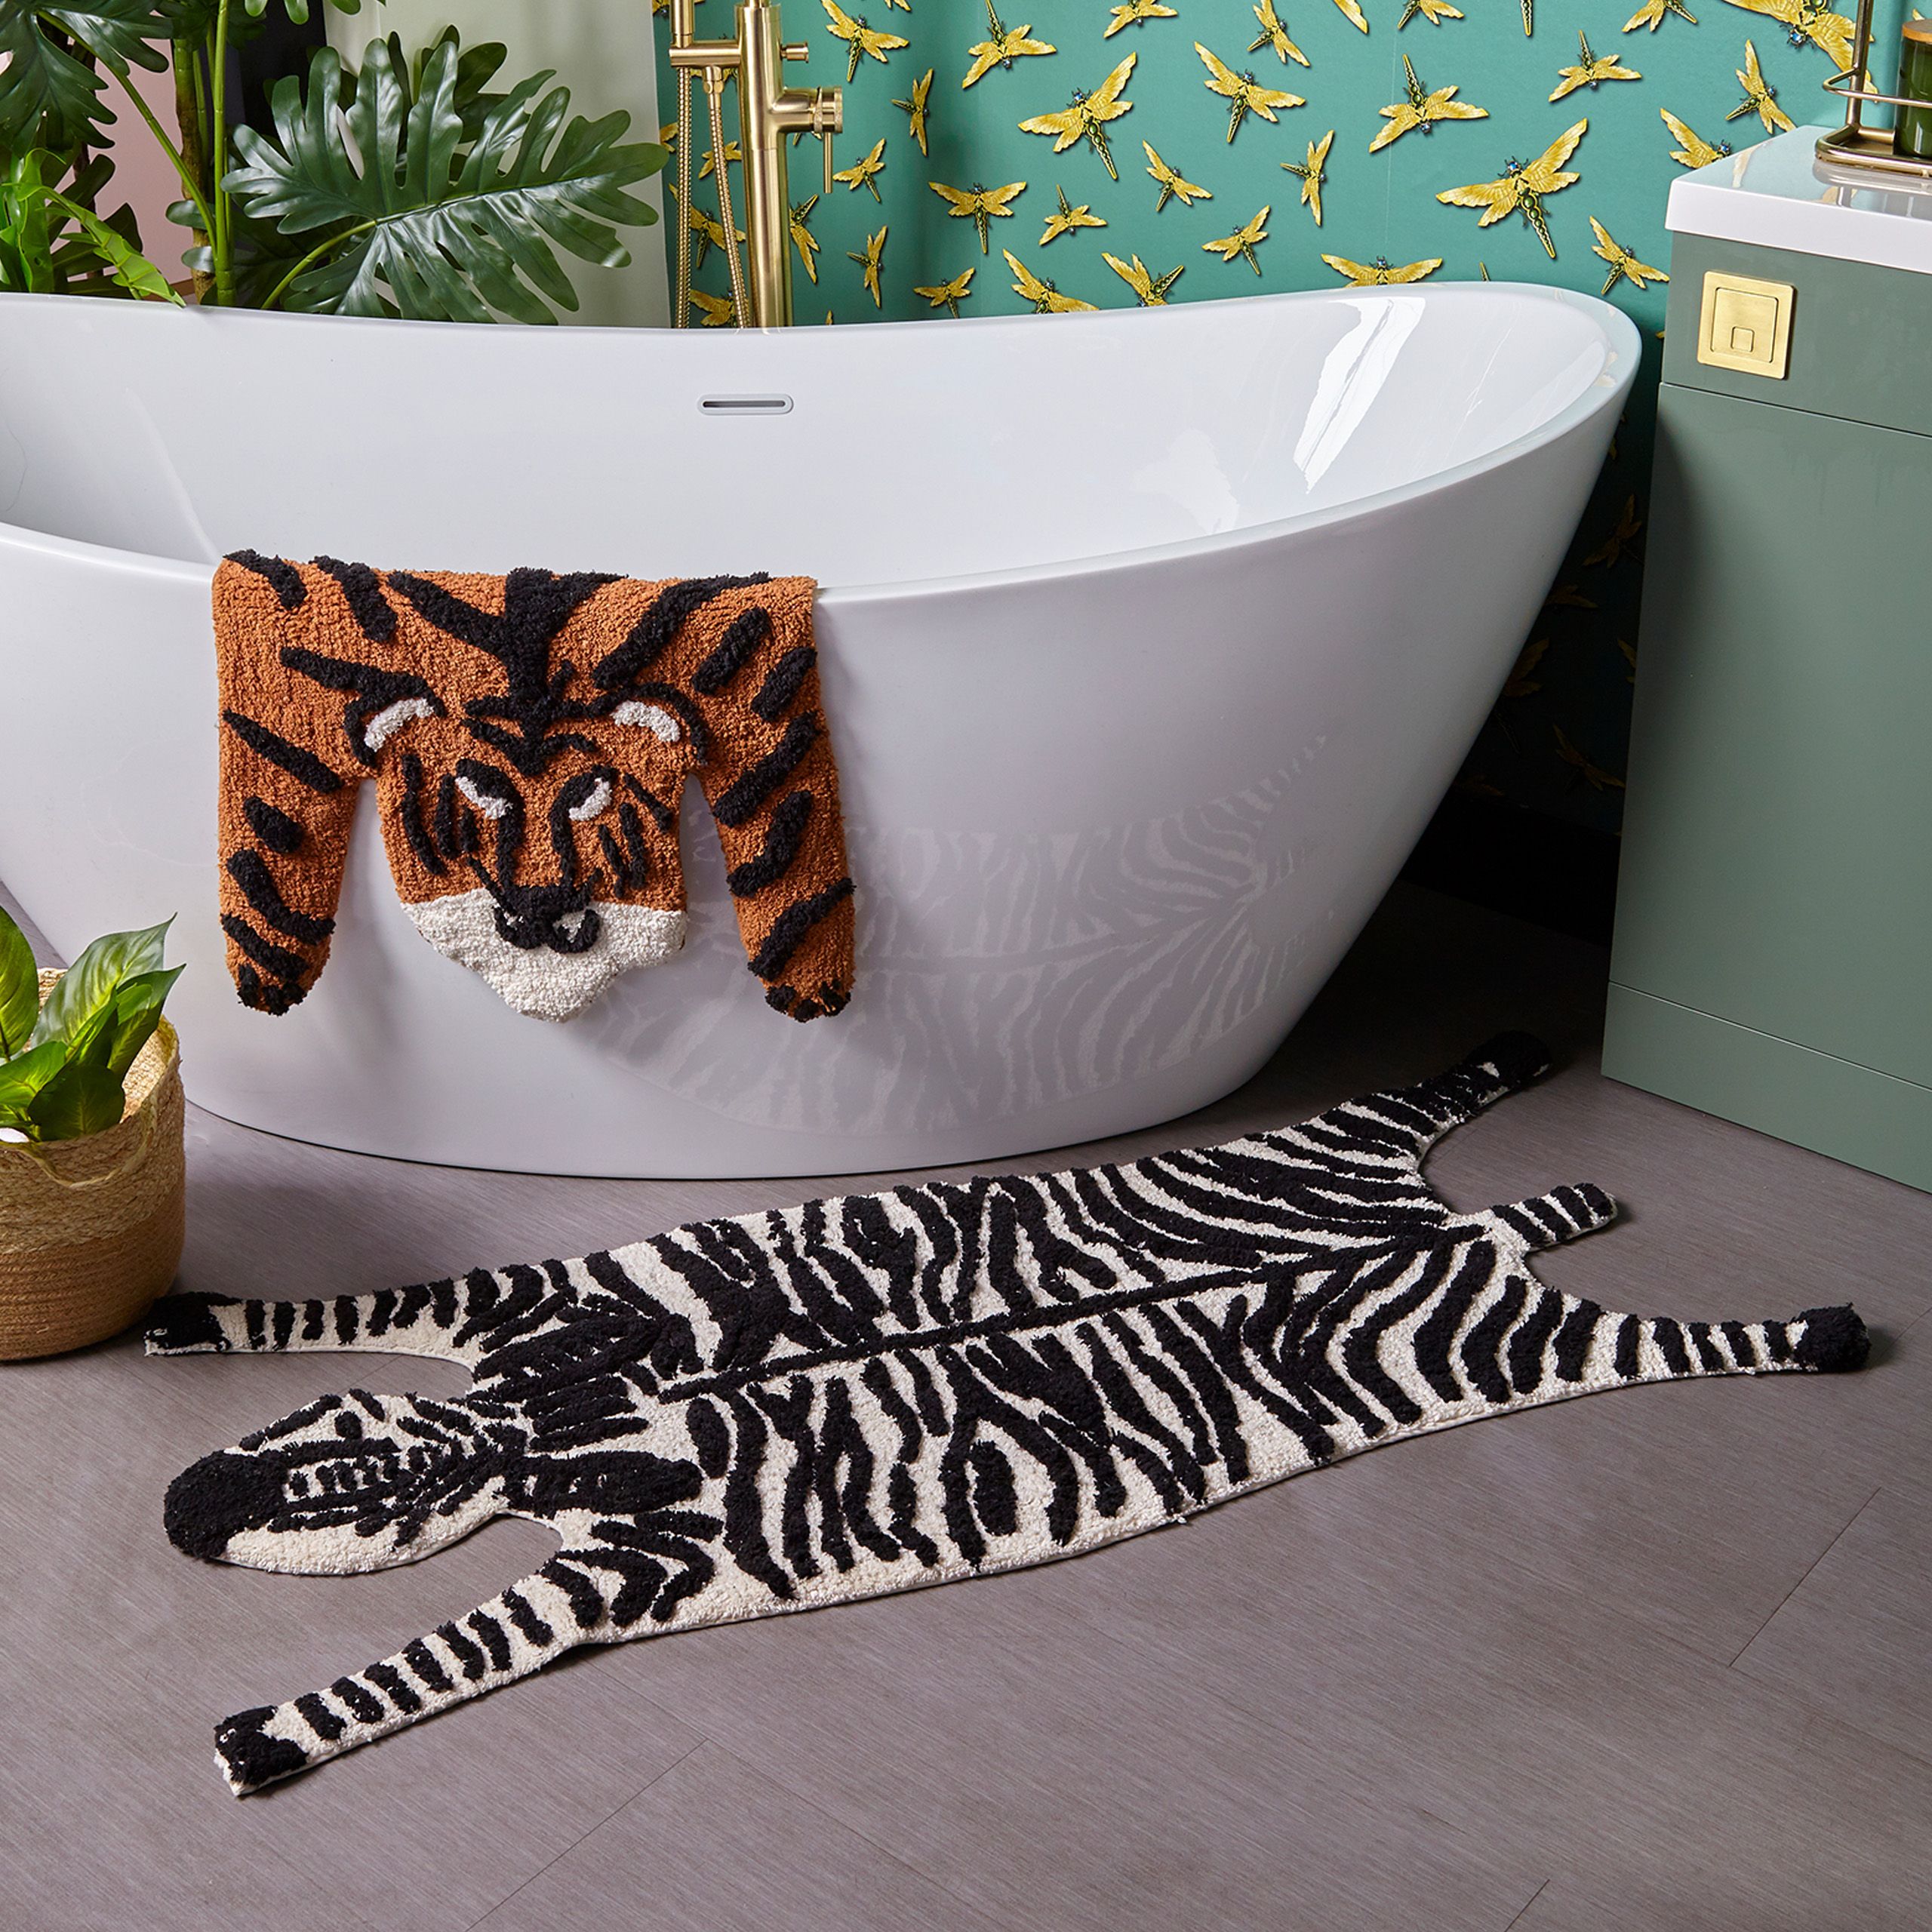 Featuring a bold zebra-shaped design, in a stylish monochrome colour palette. Made from 100% Cotton, making this bath mat incredibly soft under foot. This bath mat has an anti-slip quality, keeping it securely in place on your bathroom floor. The 1800 GSM ensures this bath mat is super absorbent preventing post-bath or shower puddles.